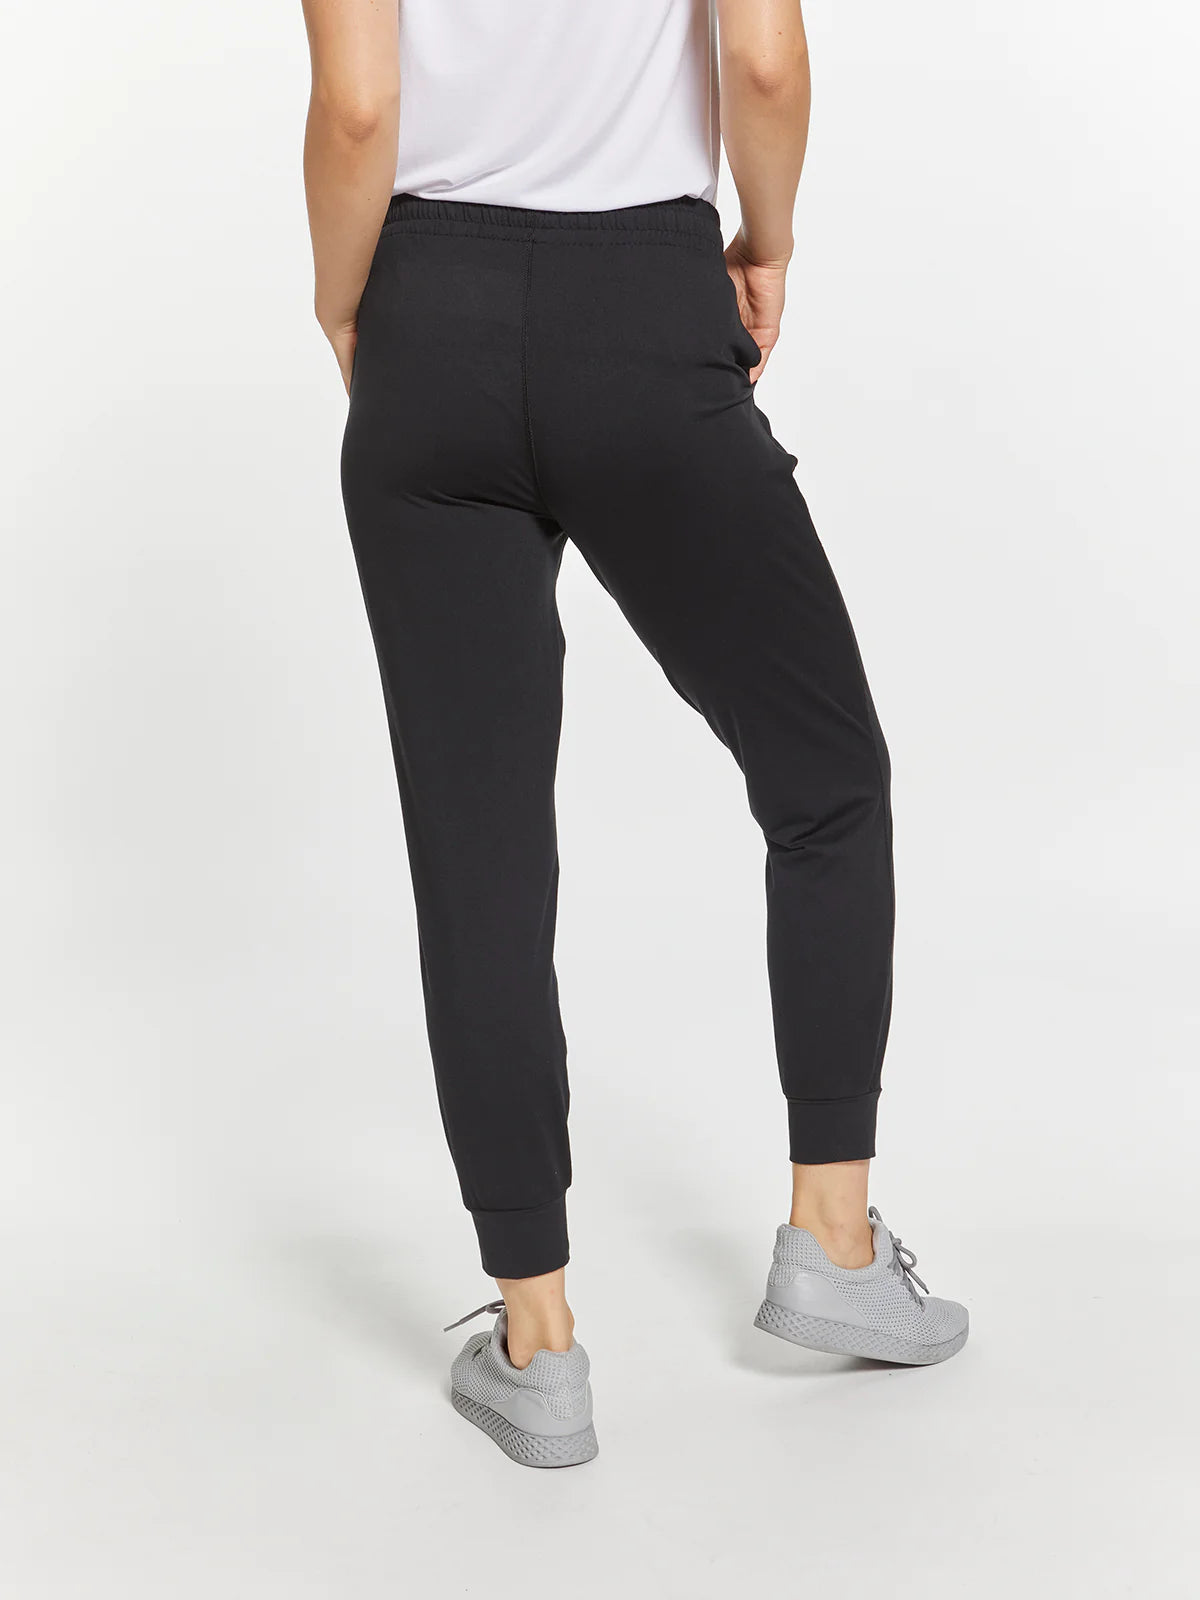 Thread & Supply®- Soft touch travel Joggers- Black